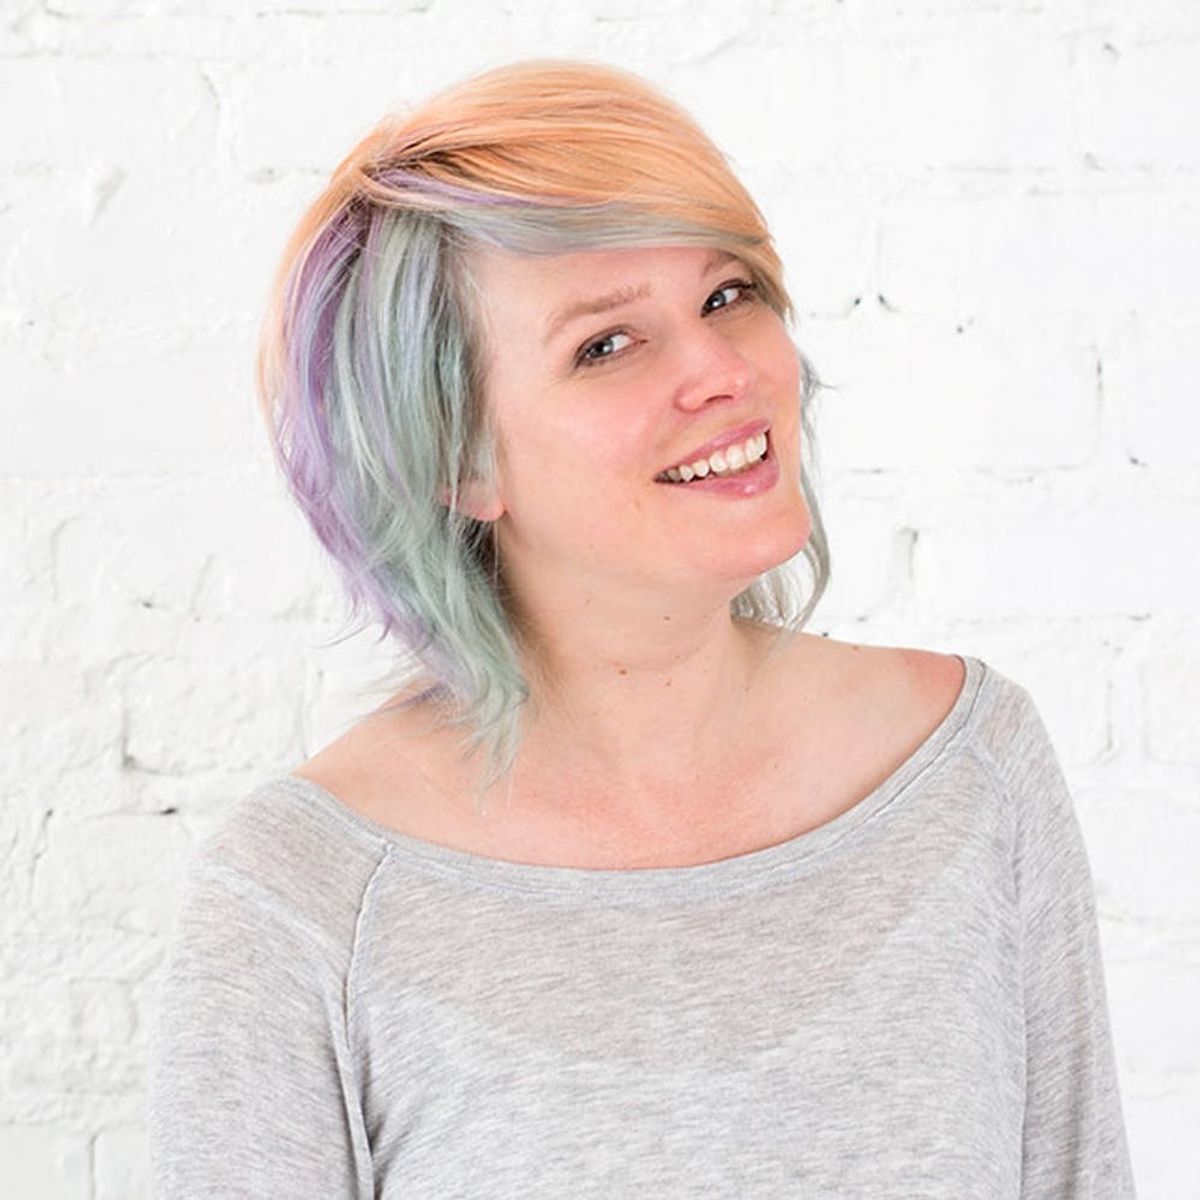 Rainbow Hair at Home? It’s Possible With This Game-Changing Hack!